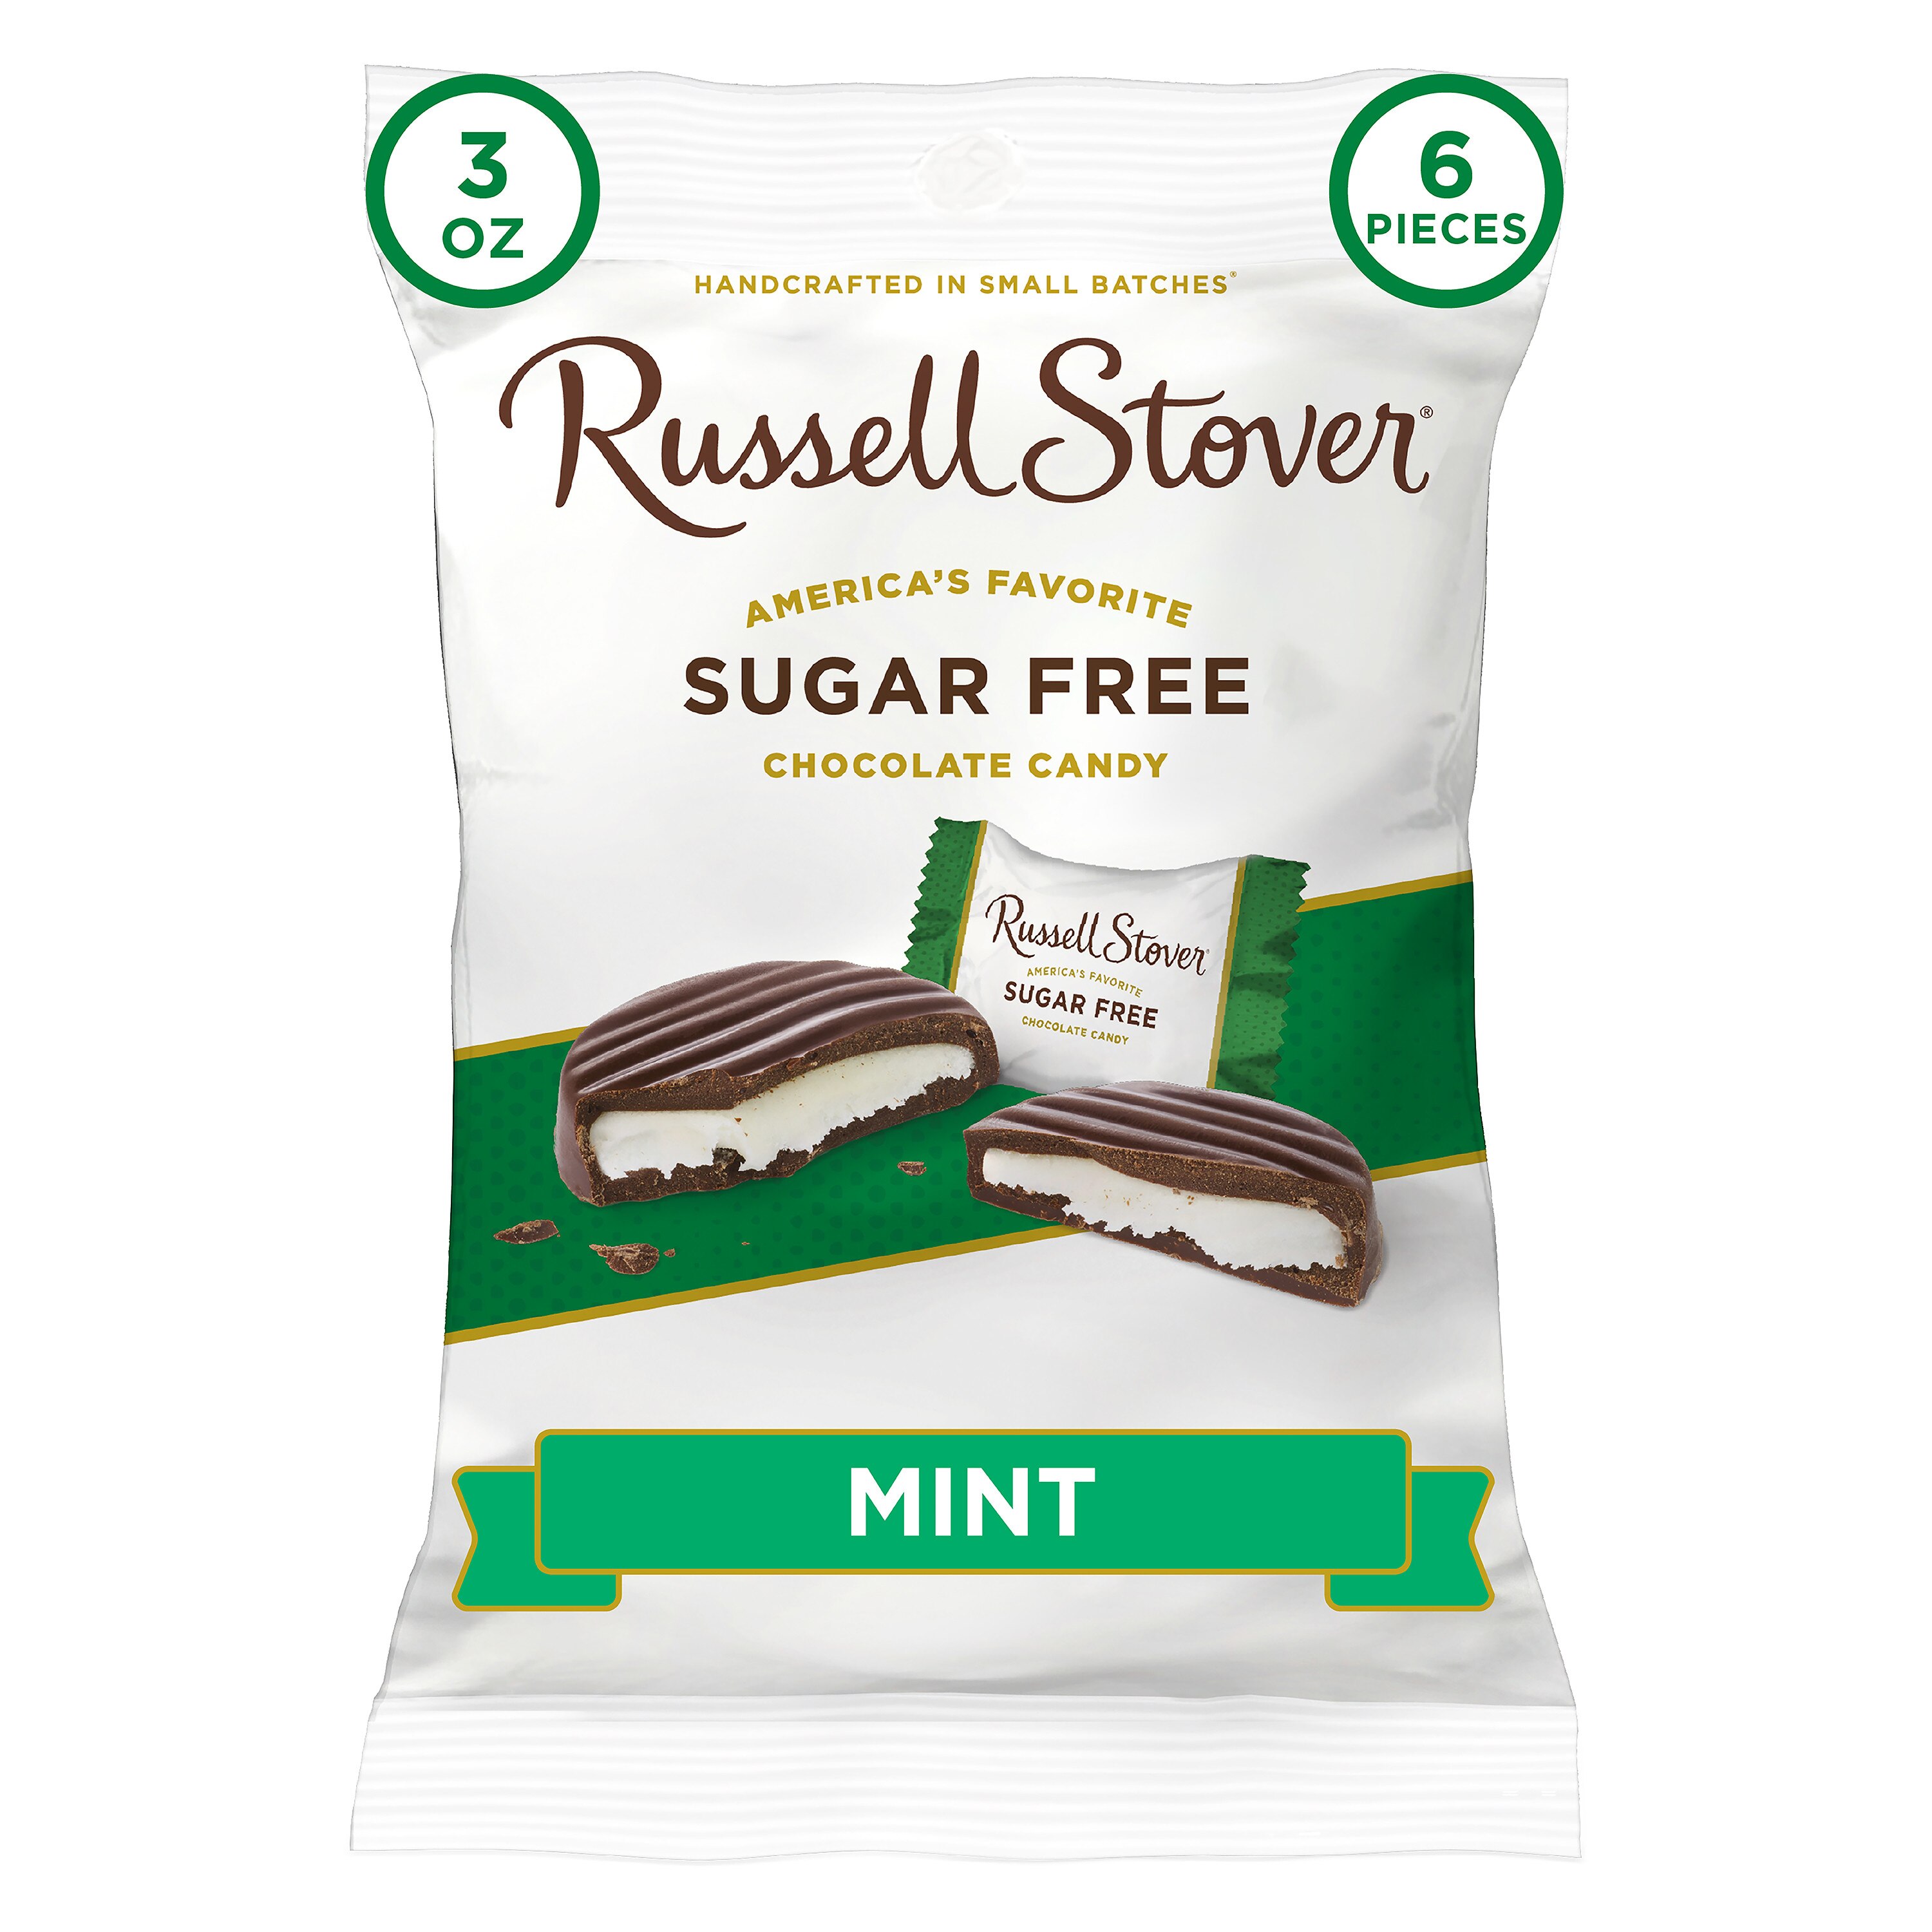 Russell Stover Sugar Free Dark Chocolate Mint Patties with Stevia, 3 OZ